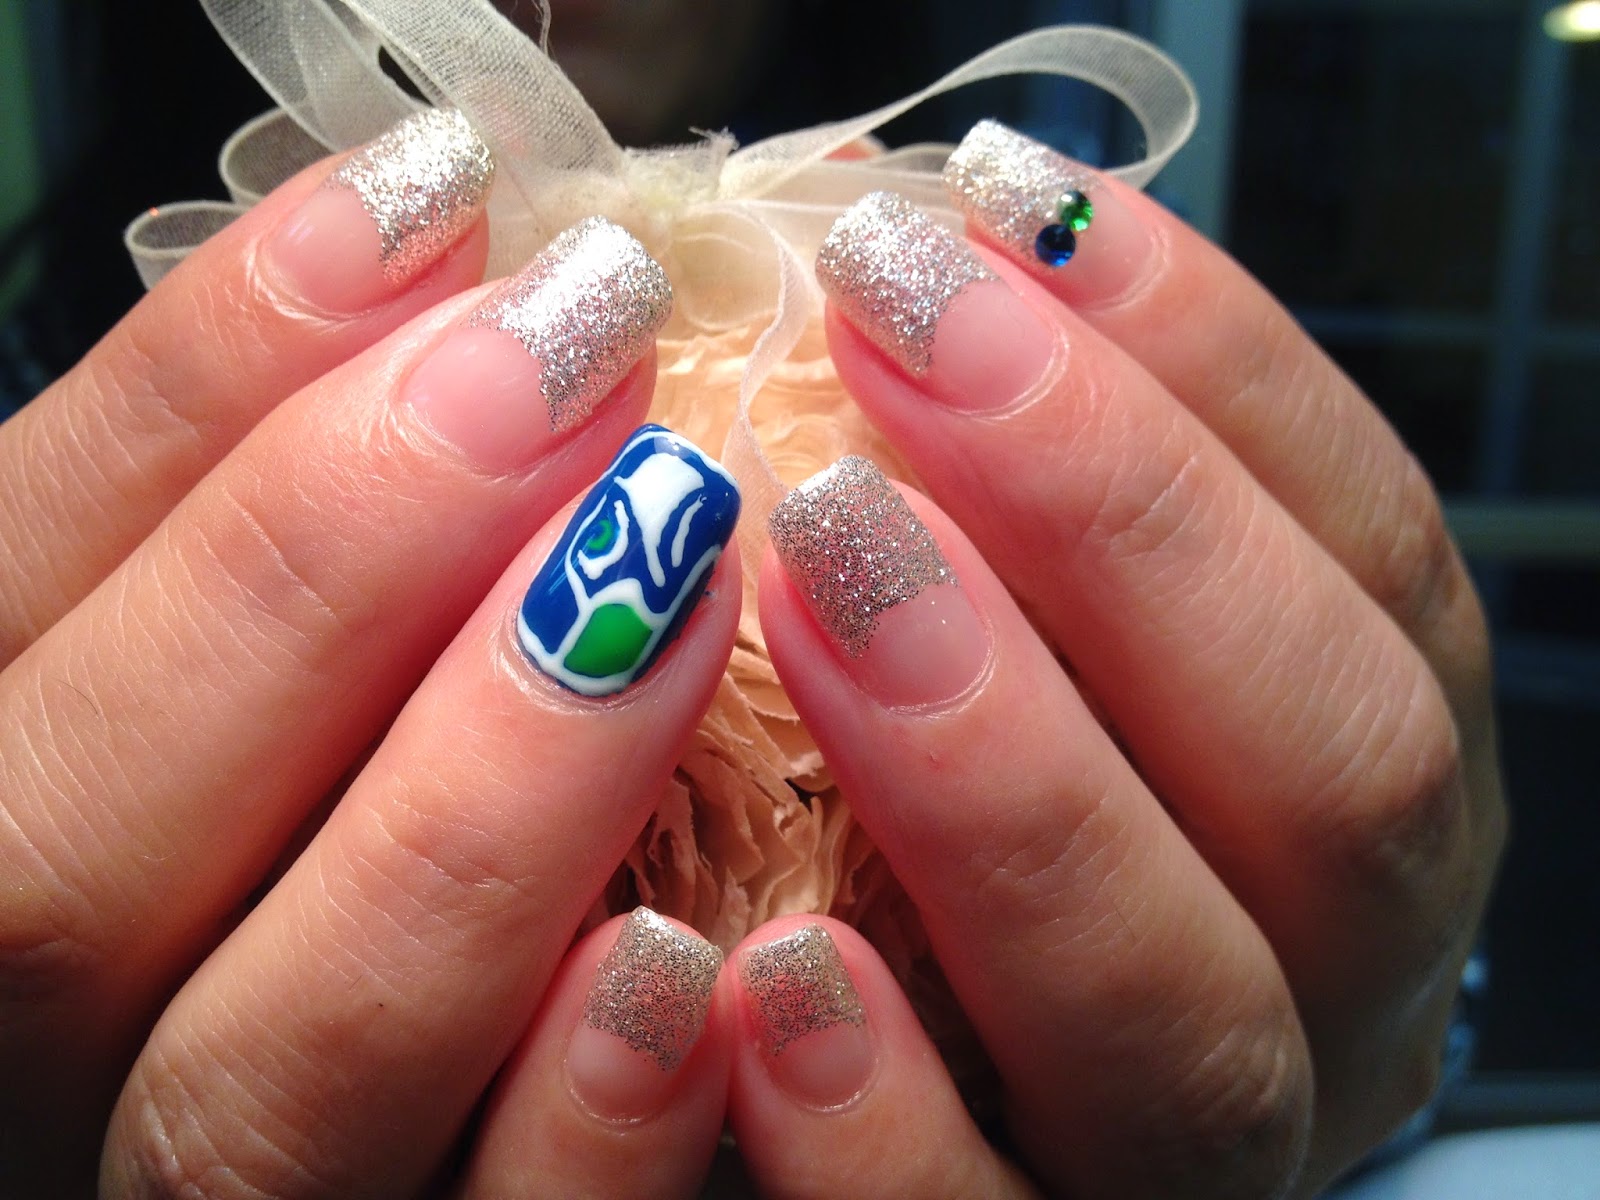 8. Seattle Seahawks Nail Designs for Game Day - wide 4